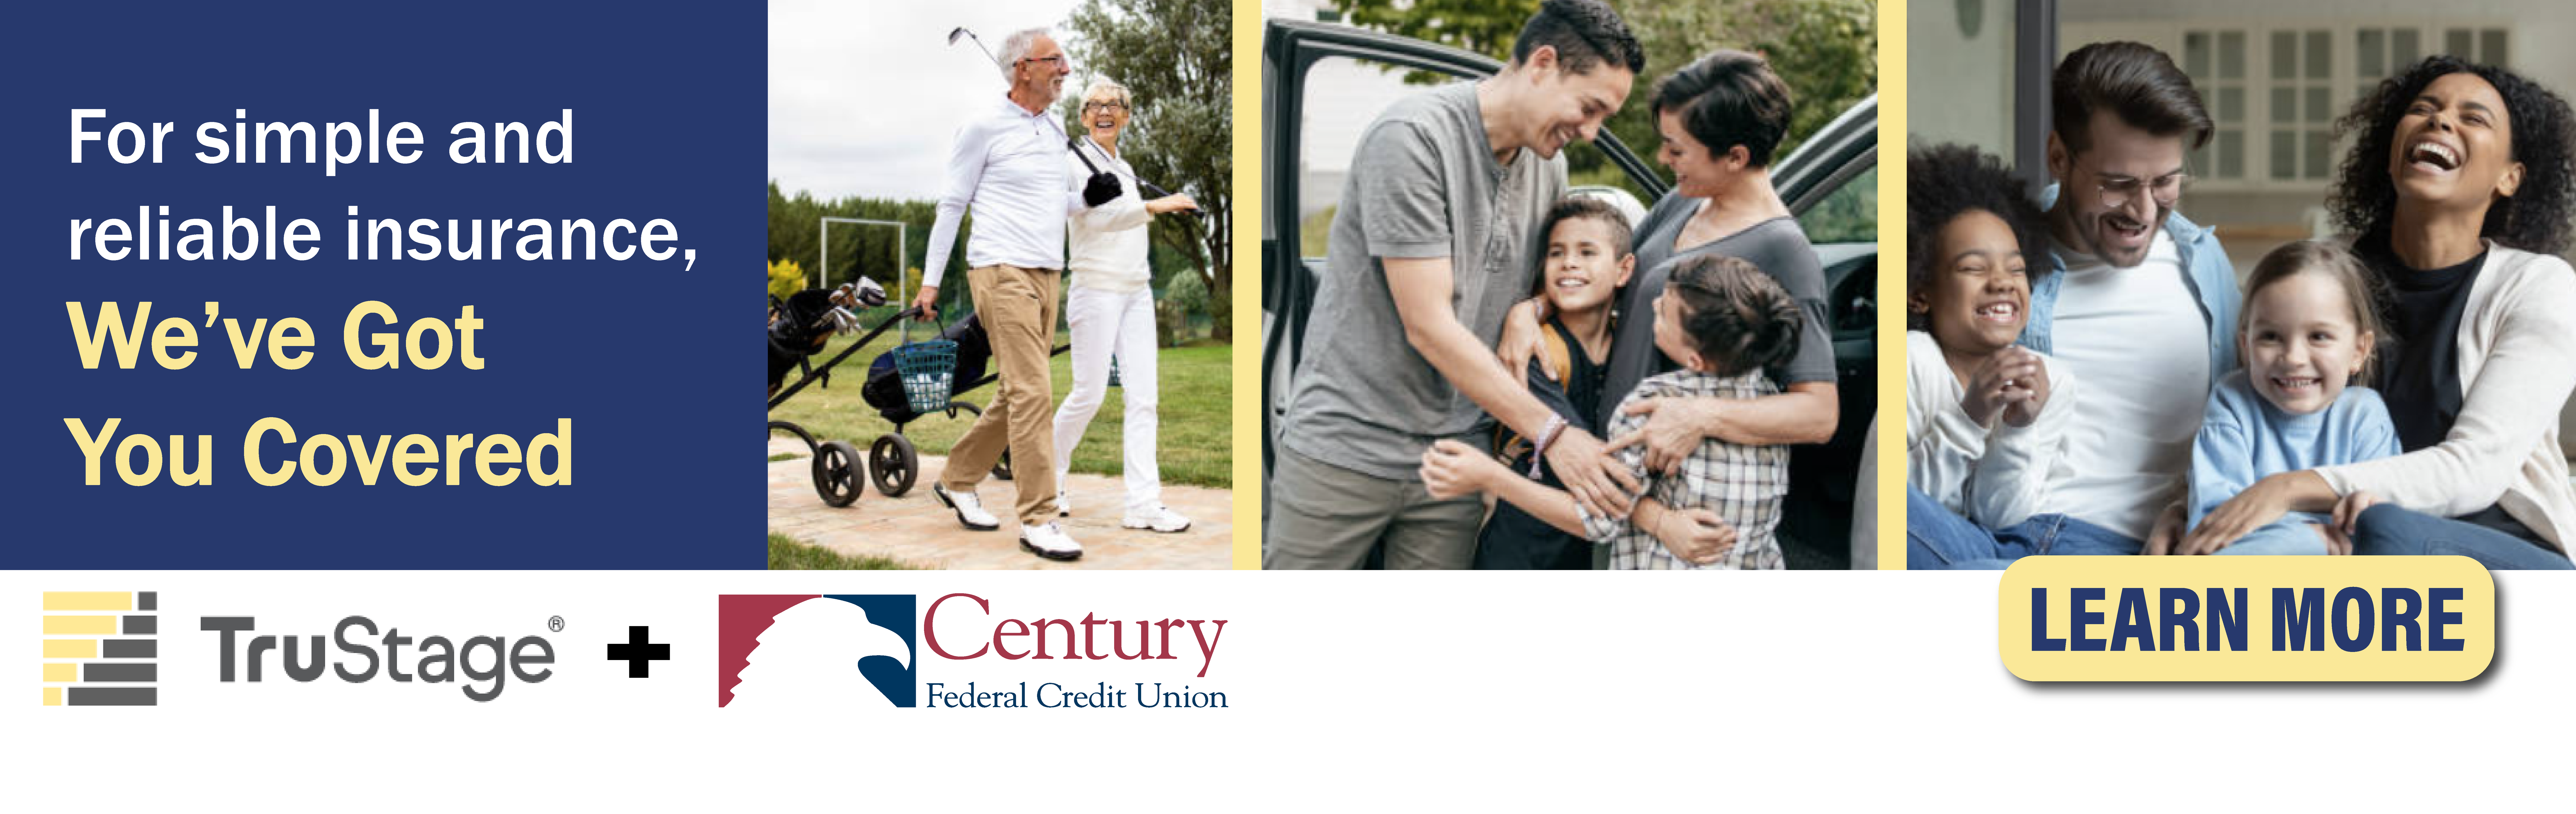 TruStage Insurance from Century Federal